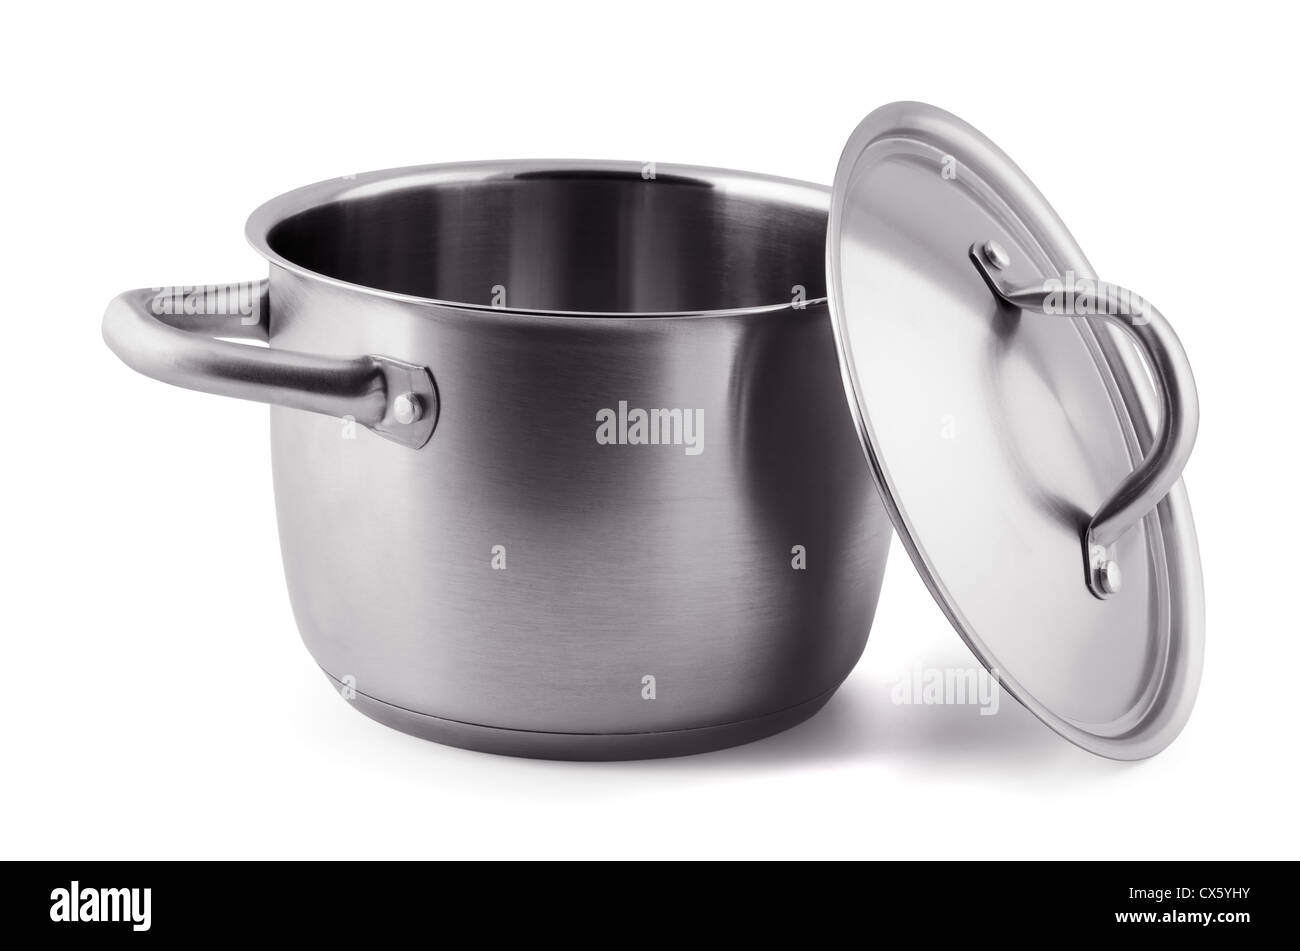 https://c8.alamy.com/comp/CX5YHY/open-stainless-steel-cooking-pot-isolated-on-white-CX5YHY.jpg